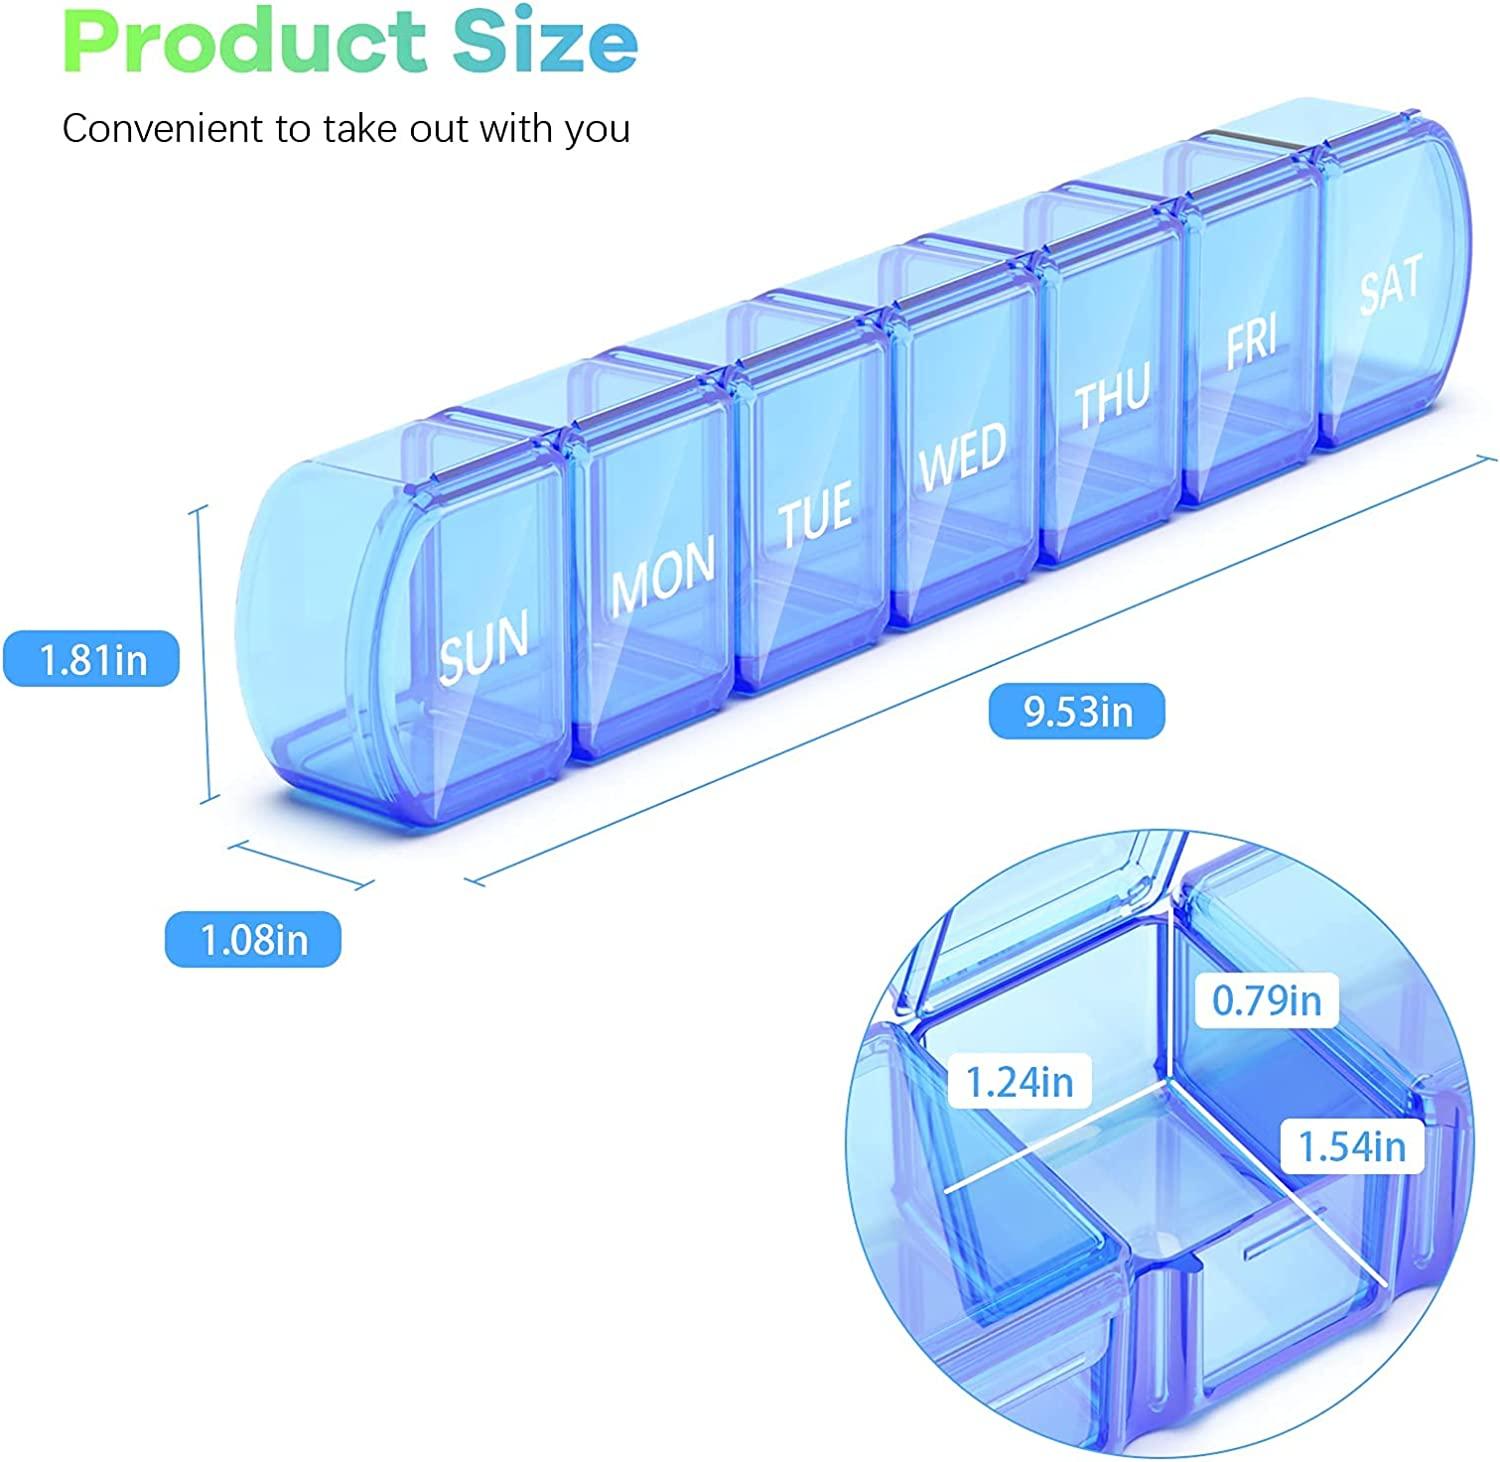 Large 7-Day / 28 Compartments Neoprene Pill Box with Designer